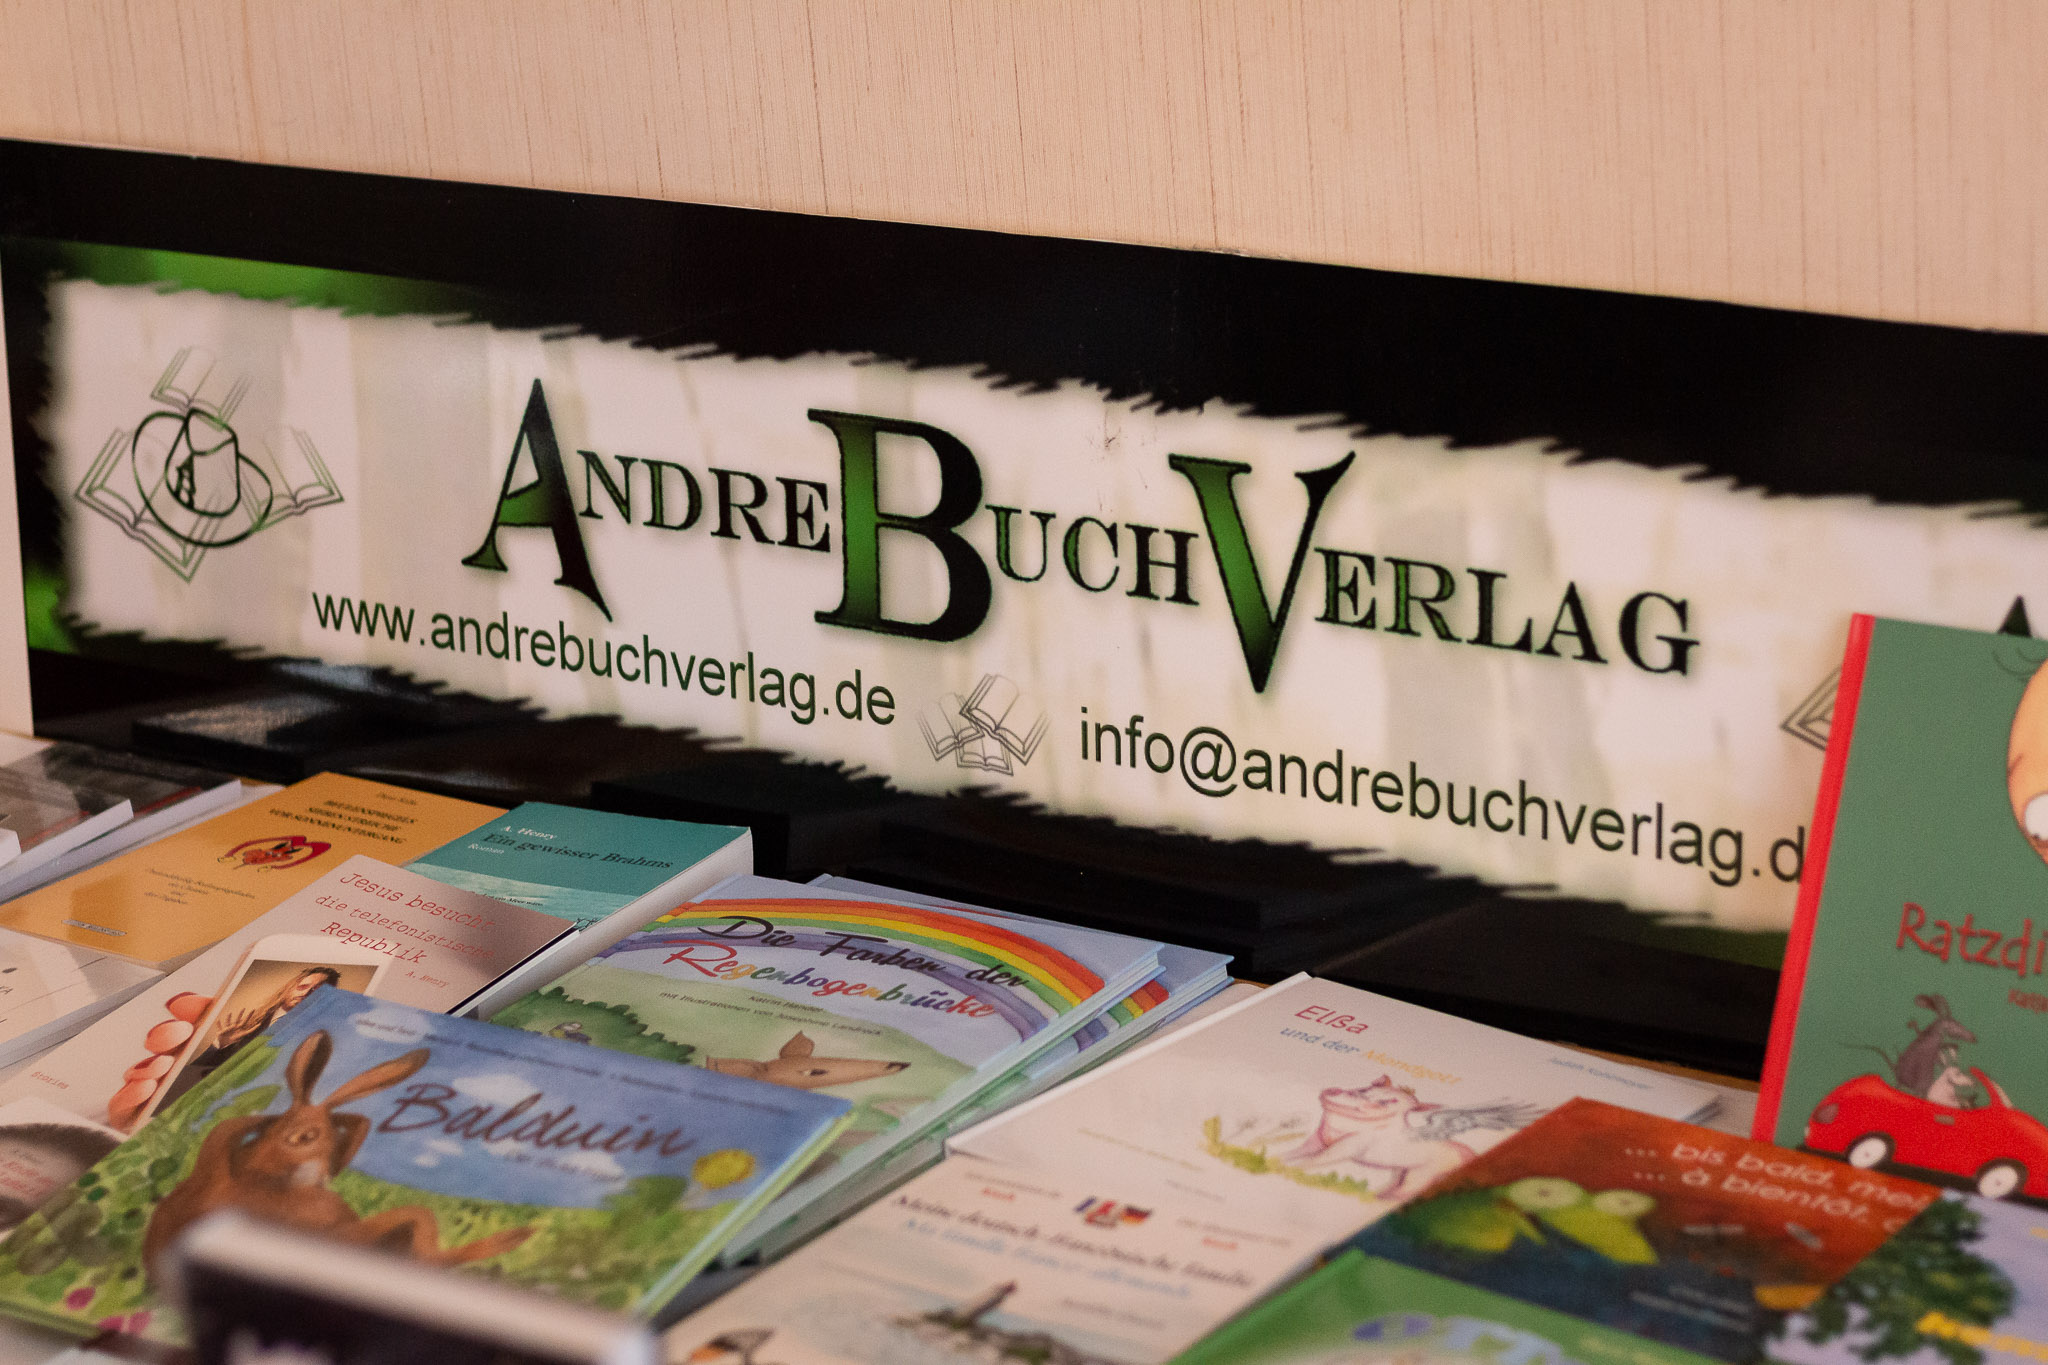 Andere Buchmesse Wien: Andre Buch Verlag